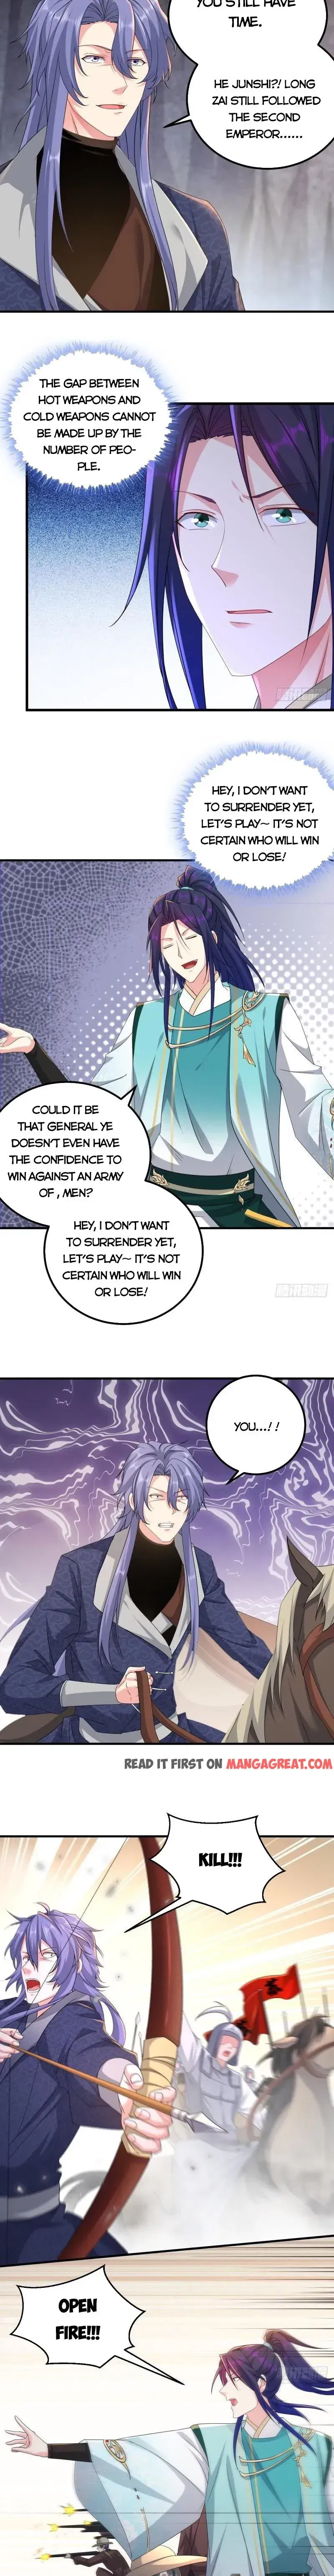 Forced to Become the Villain's Son-in-law Chapter 403 page 4